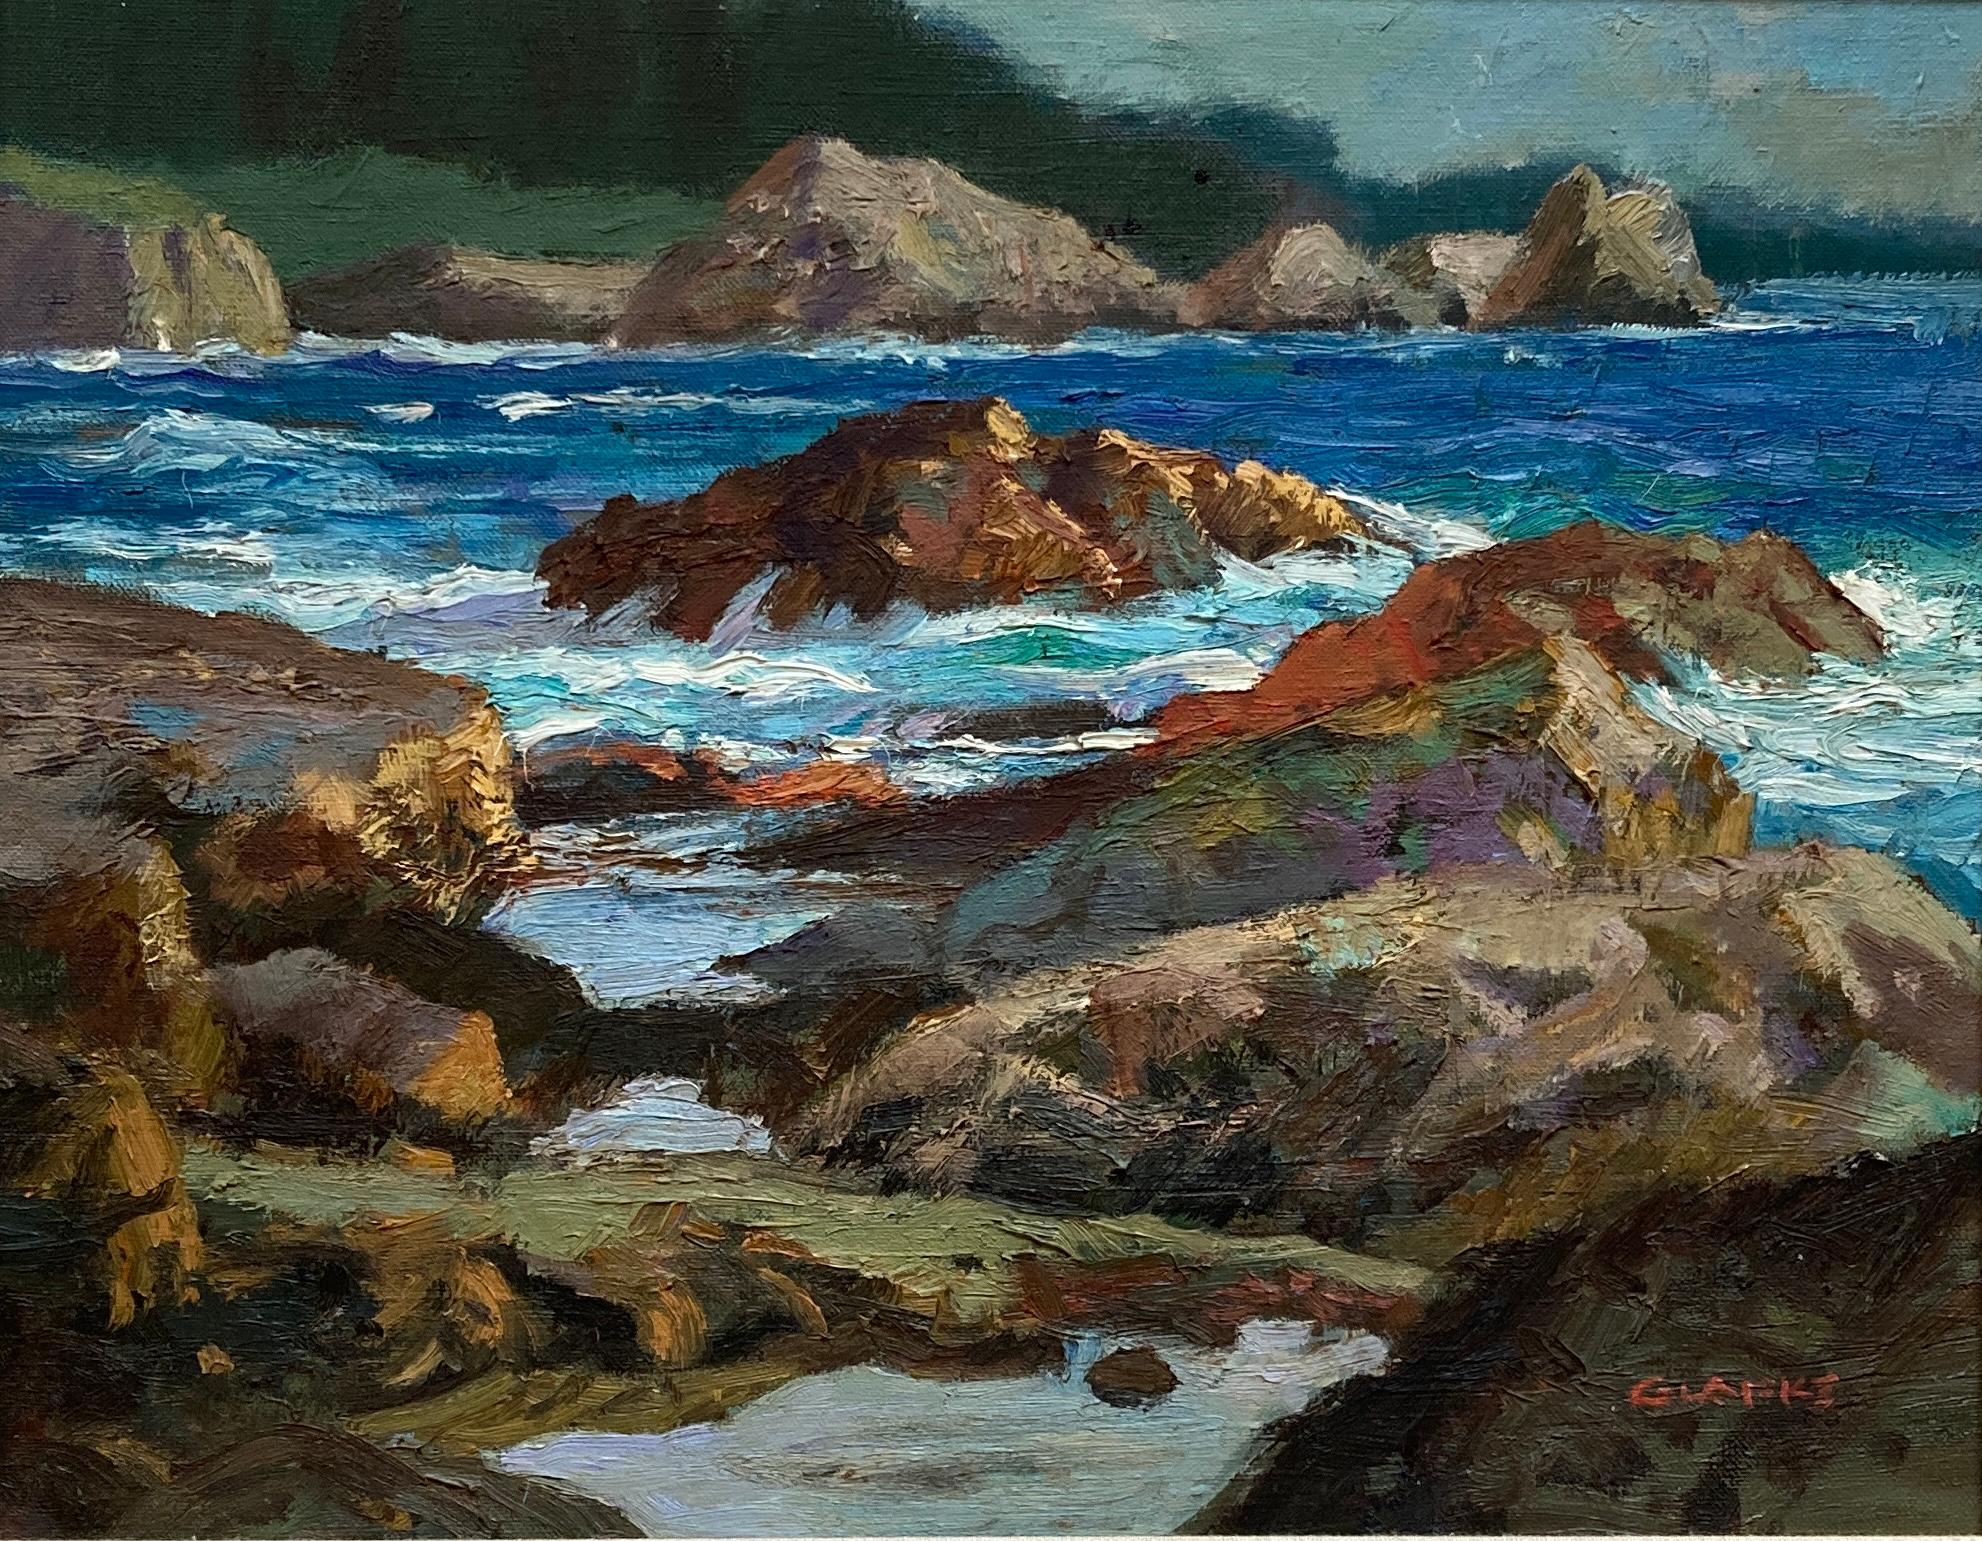 Edward Glafke (American 1925 - 1997)
Pebble Beach Coast
Late 20th C.
Oil on cavas
Signed 'Glafke' lower right
Canvas: 14in H x 18 in L
In a white washed, linen lined frame: 20.25in H x 24.25in L x 2in D

Edward Glafke was born in Portland Oregon and